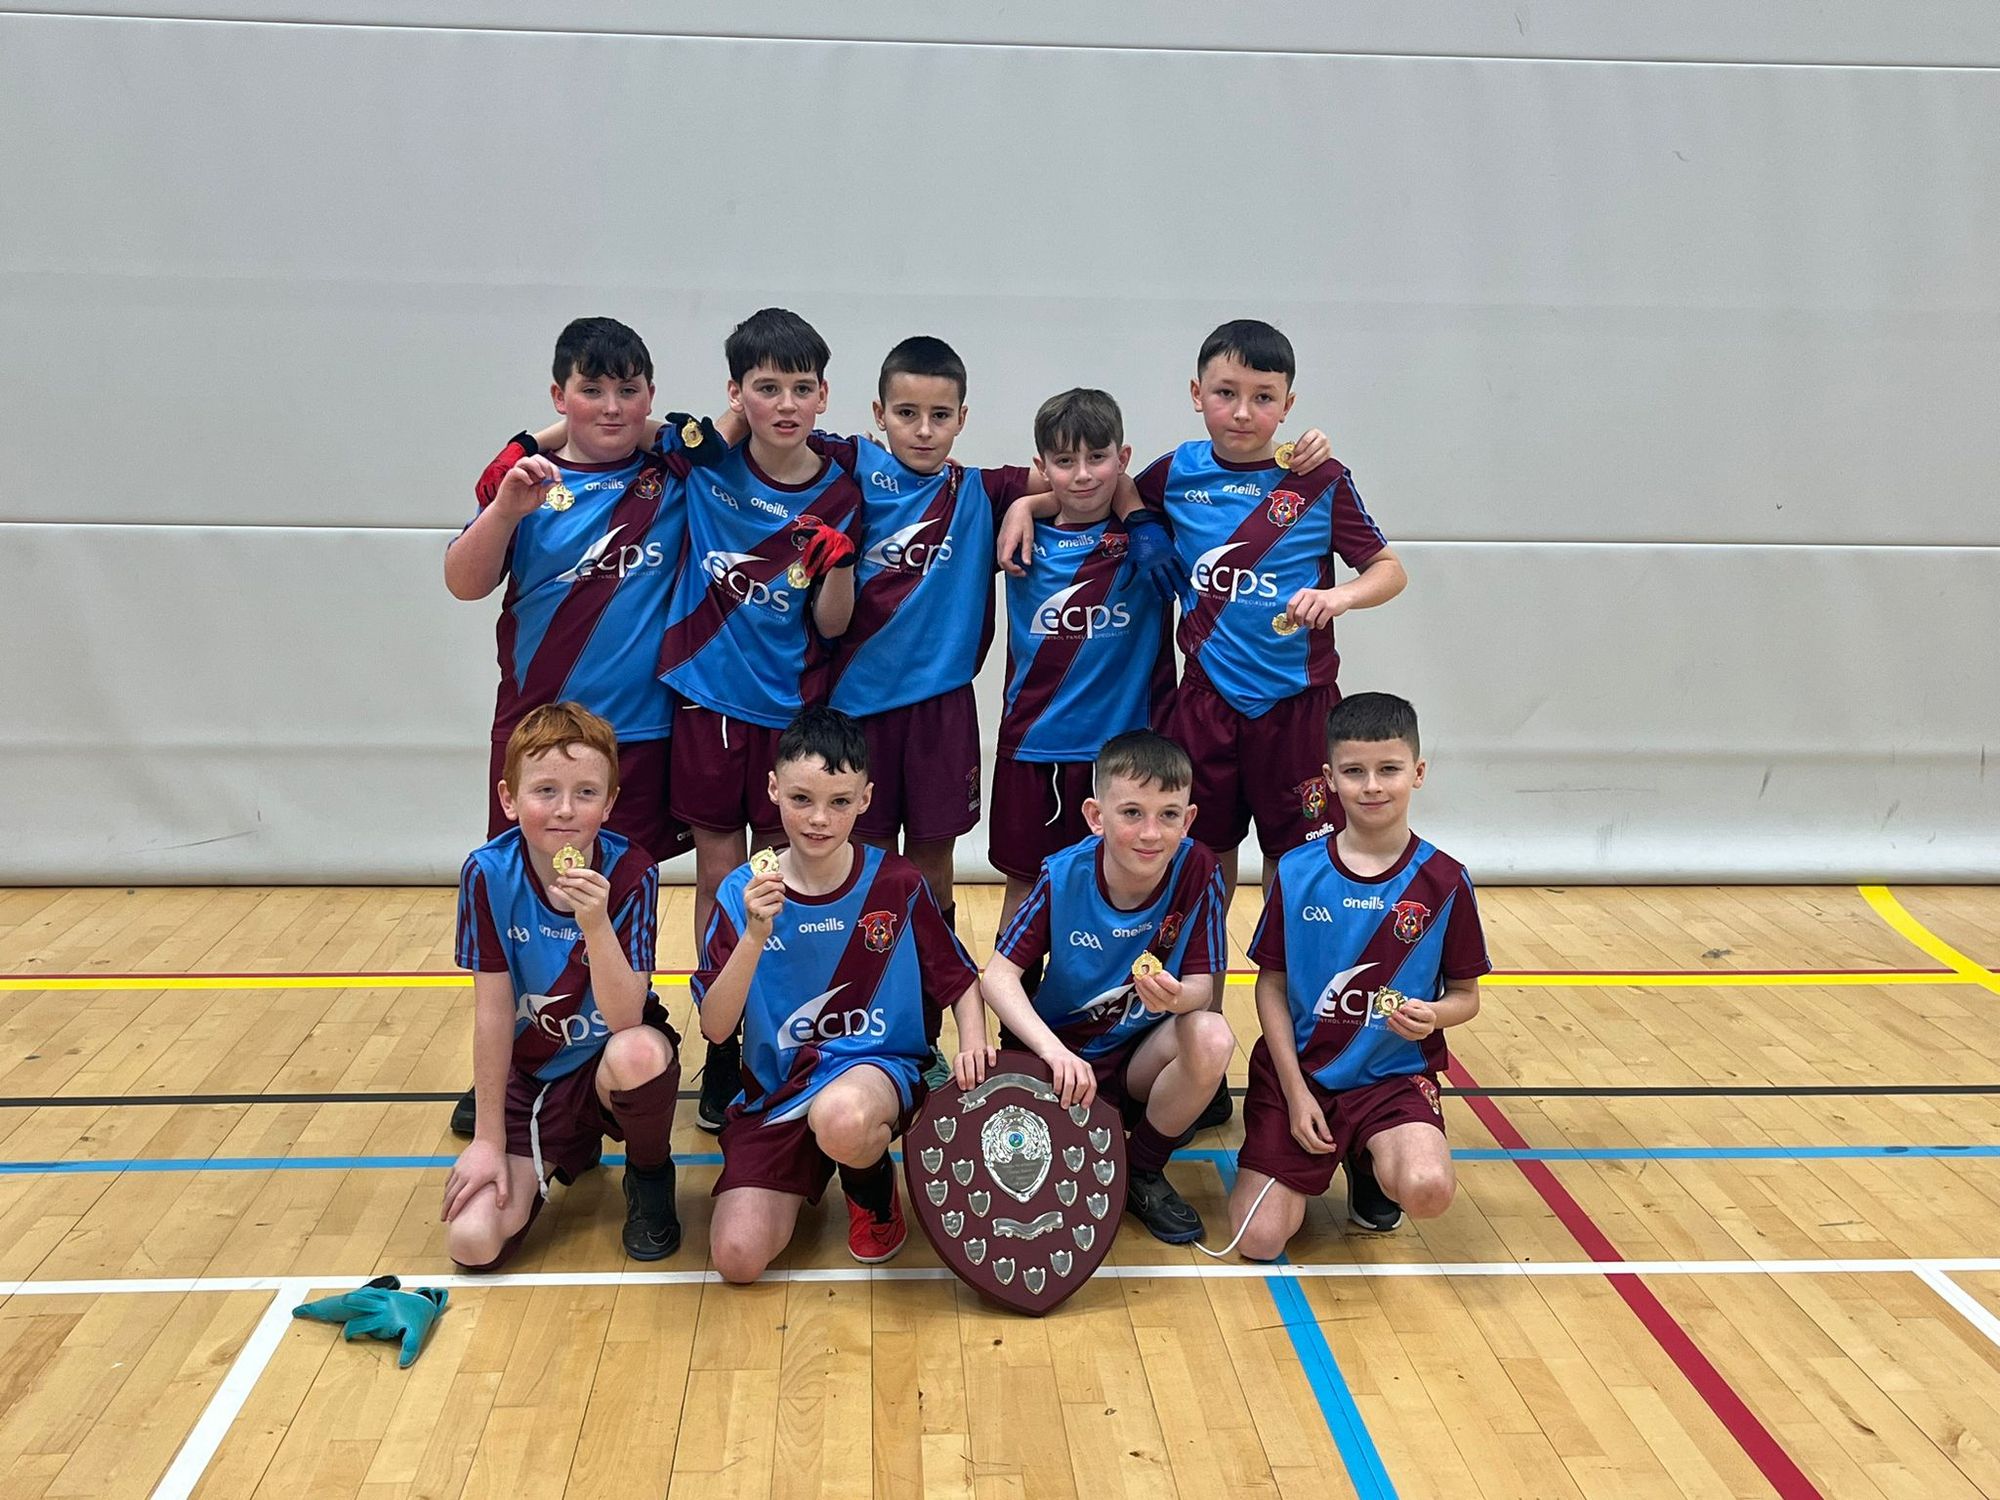 Well done to our boys' Gaelic team